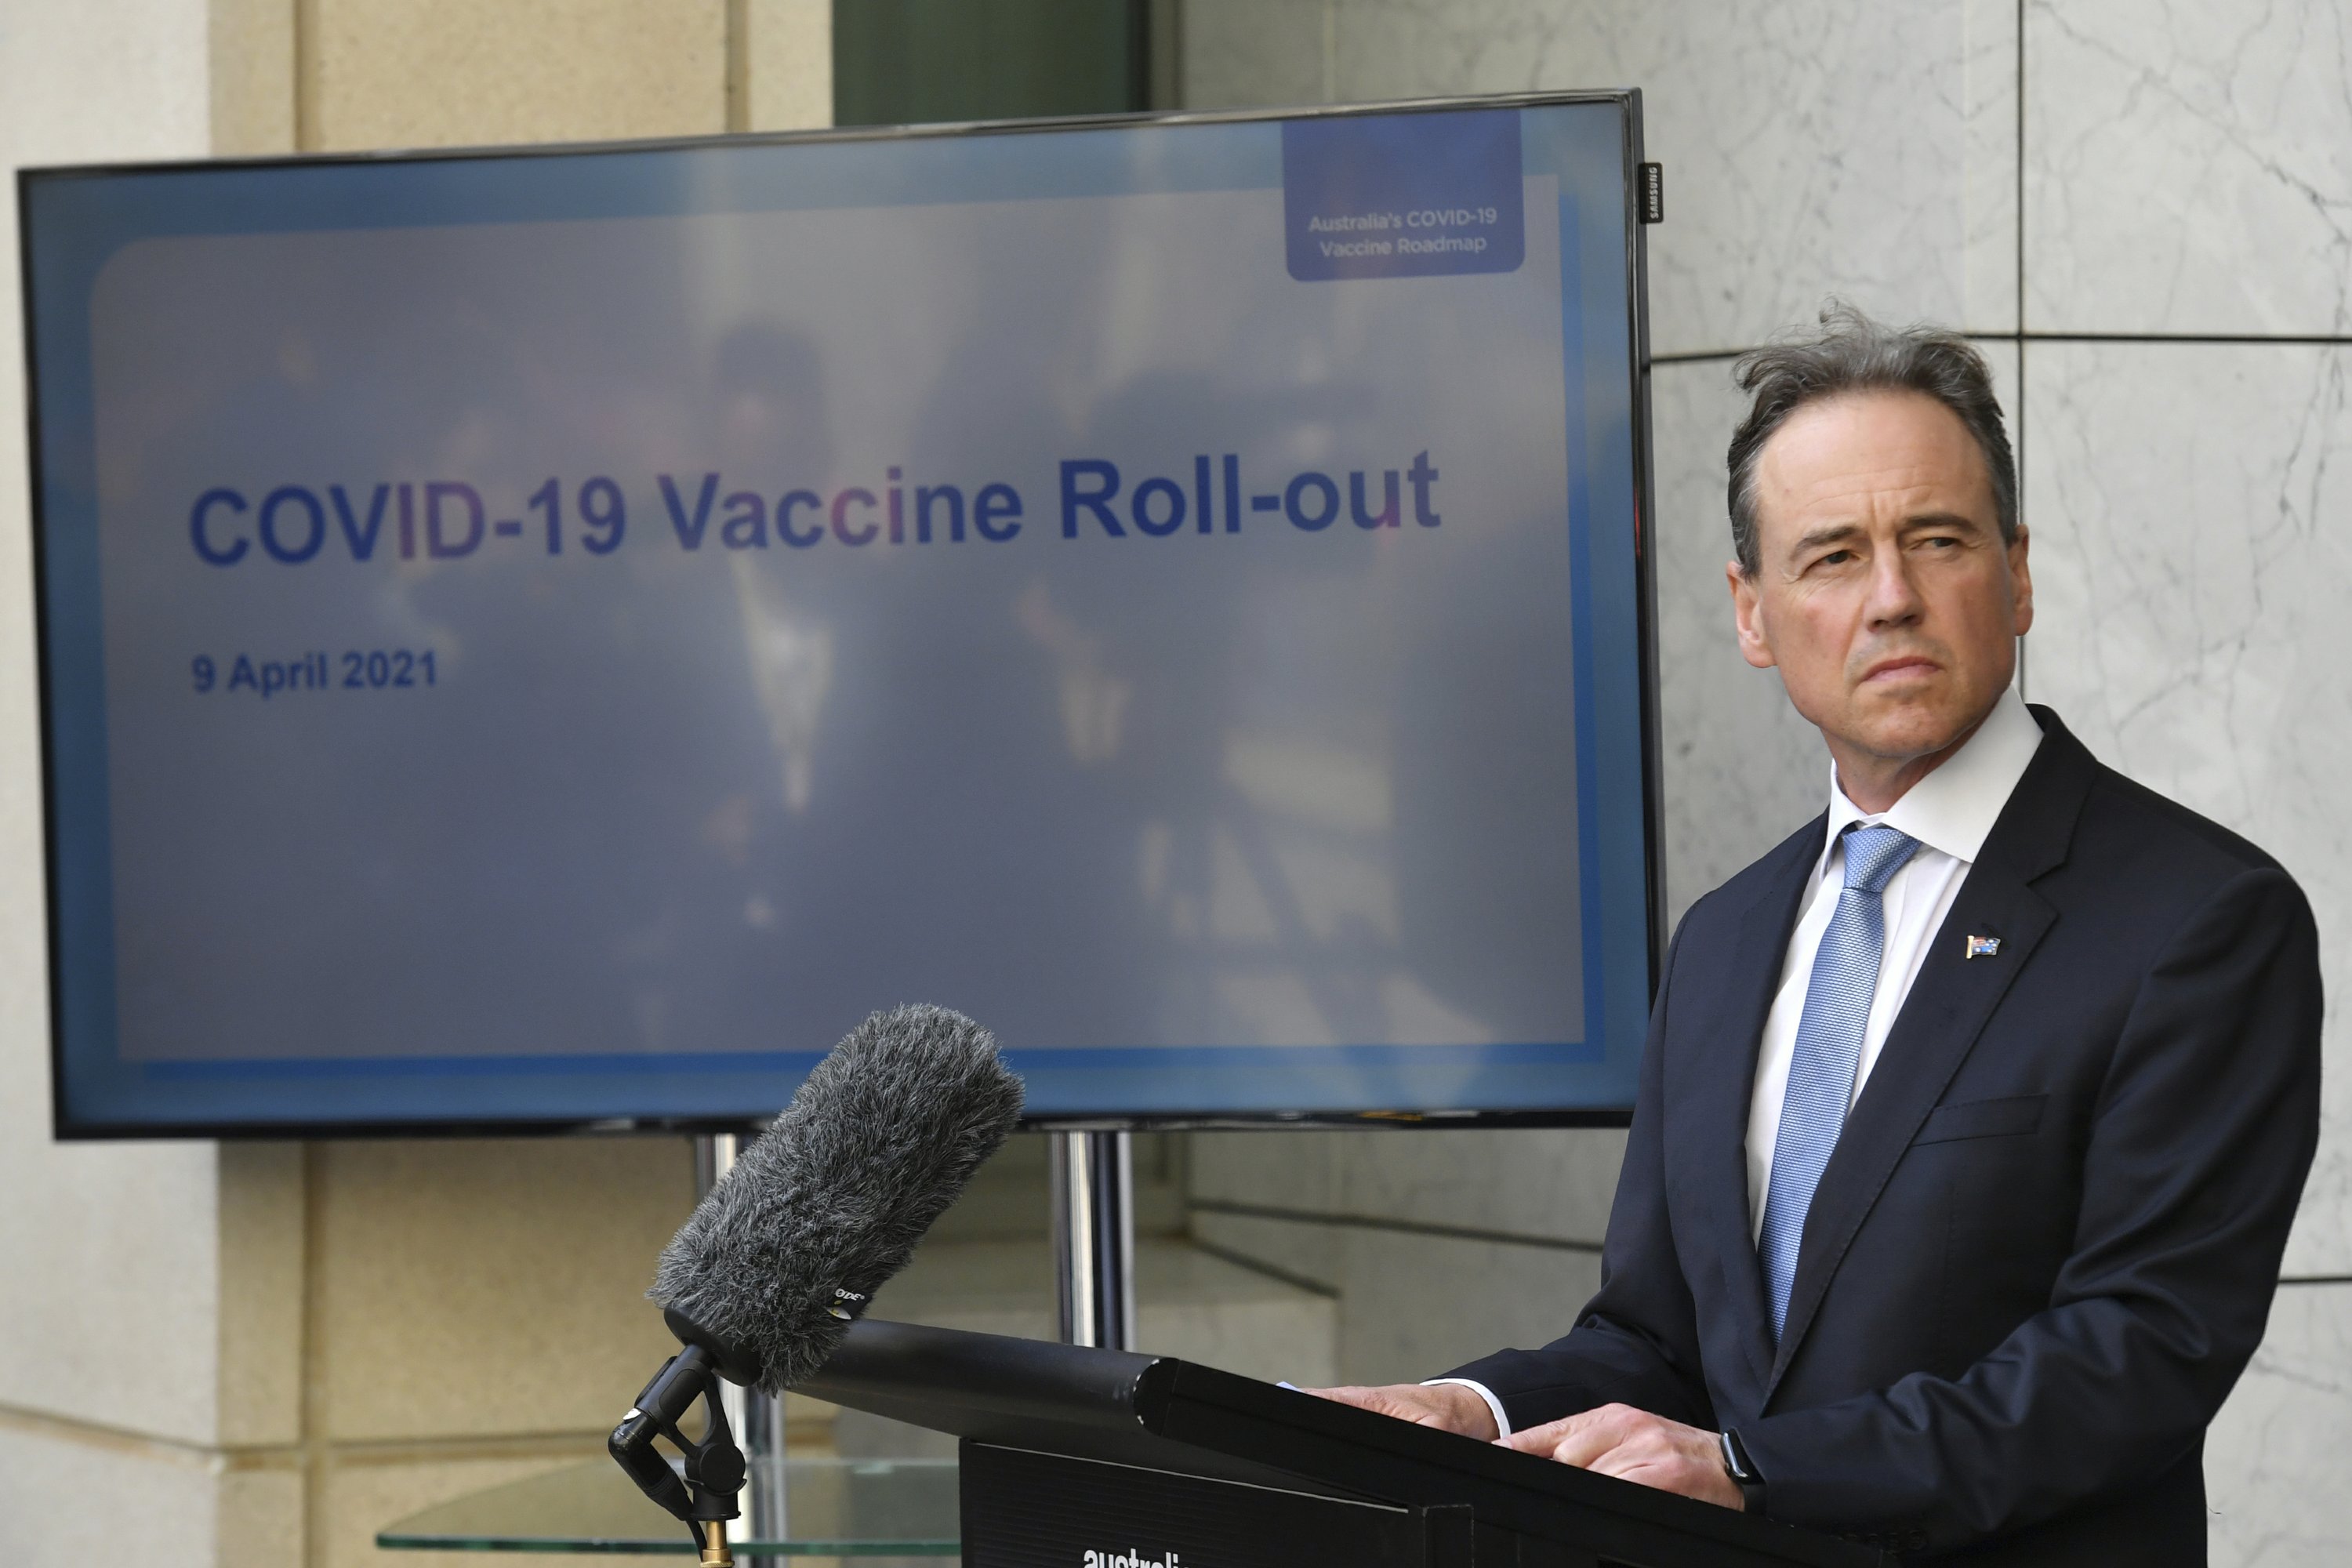 Australia rules out adding J & J vaccine to vaccination plan